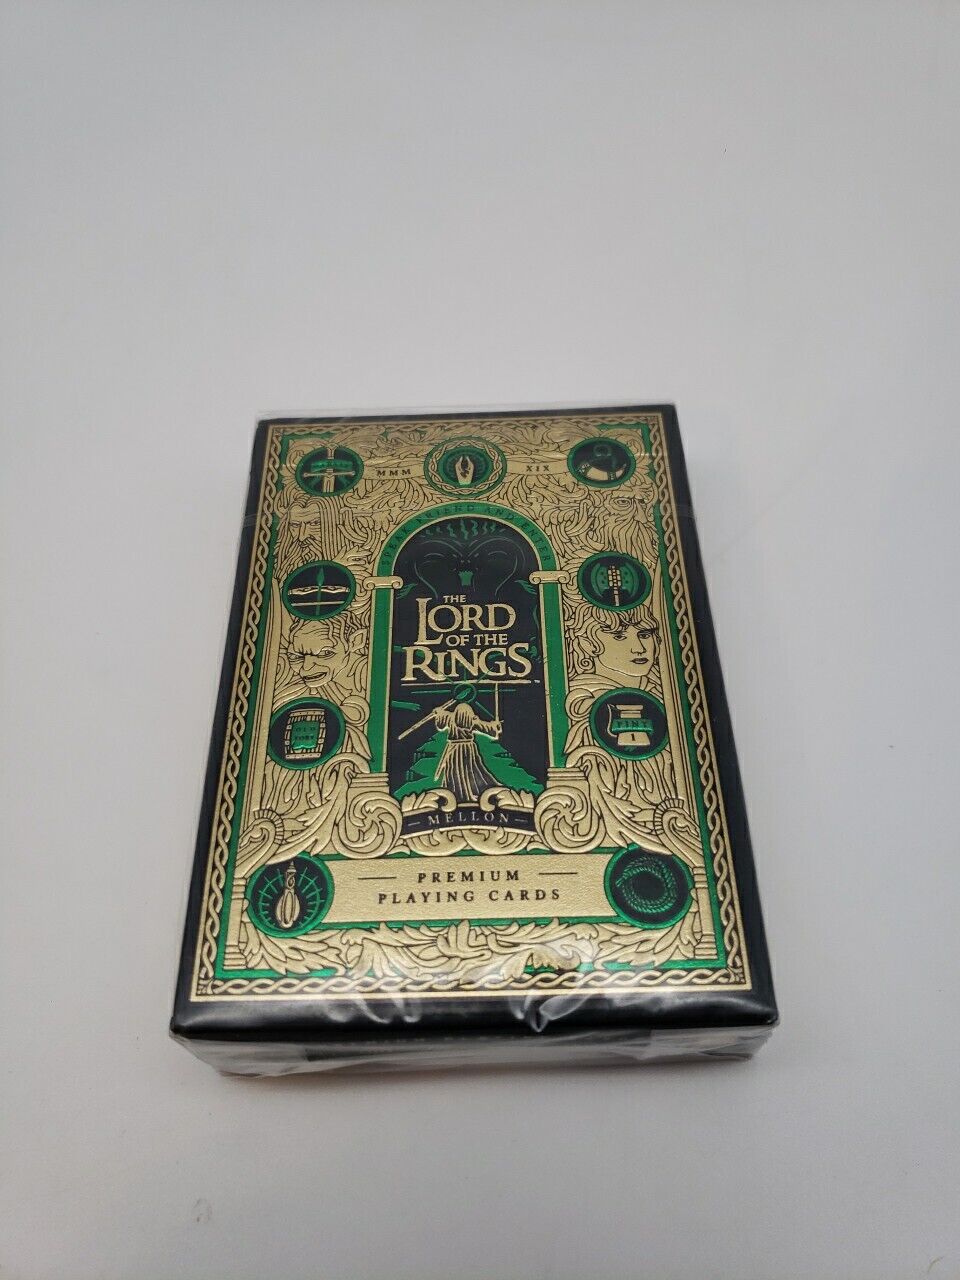 Lord of the Rings Premium Playing Cards By Theory11 (Green) BRAND NEW Sealed